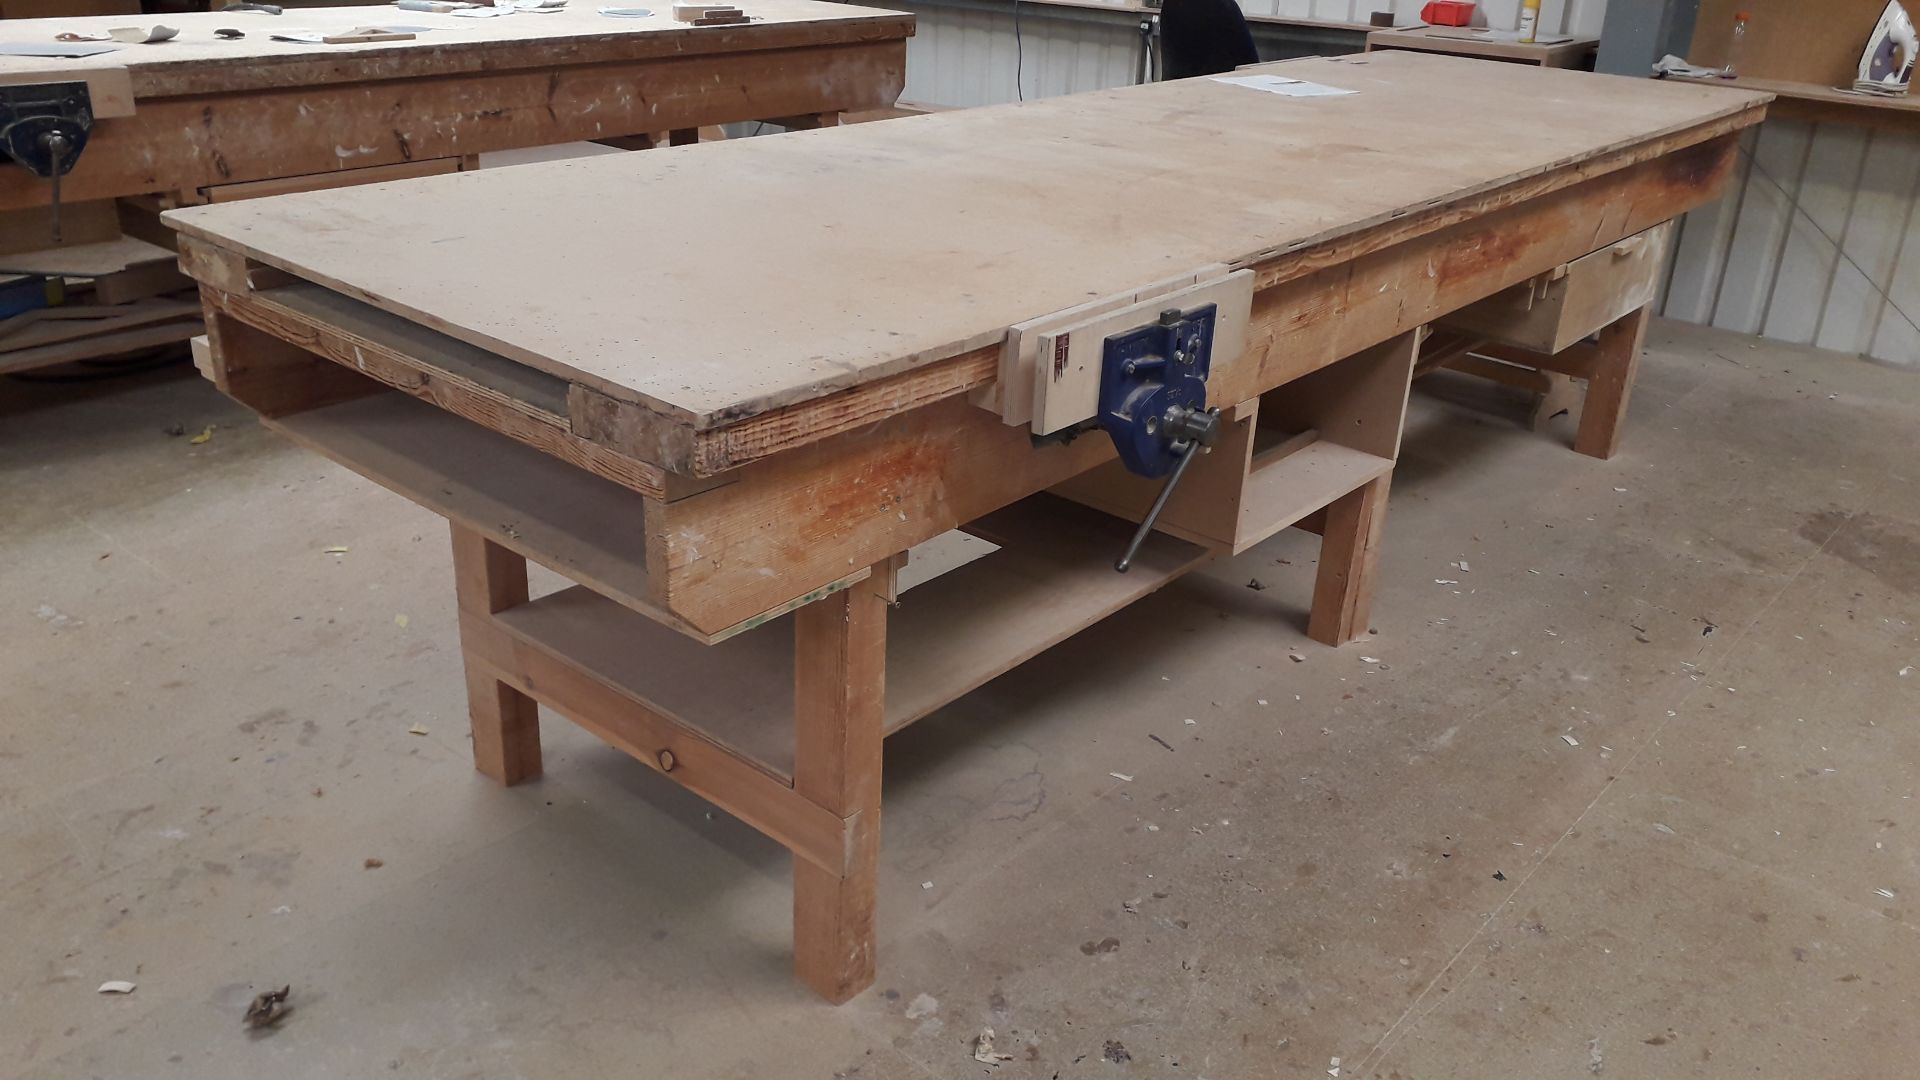 3x Timber Workbenches with Vice and Storage Under, Approx 4m x 1m - Located on 1st Floor. Contents - Image 4 of 7